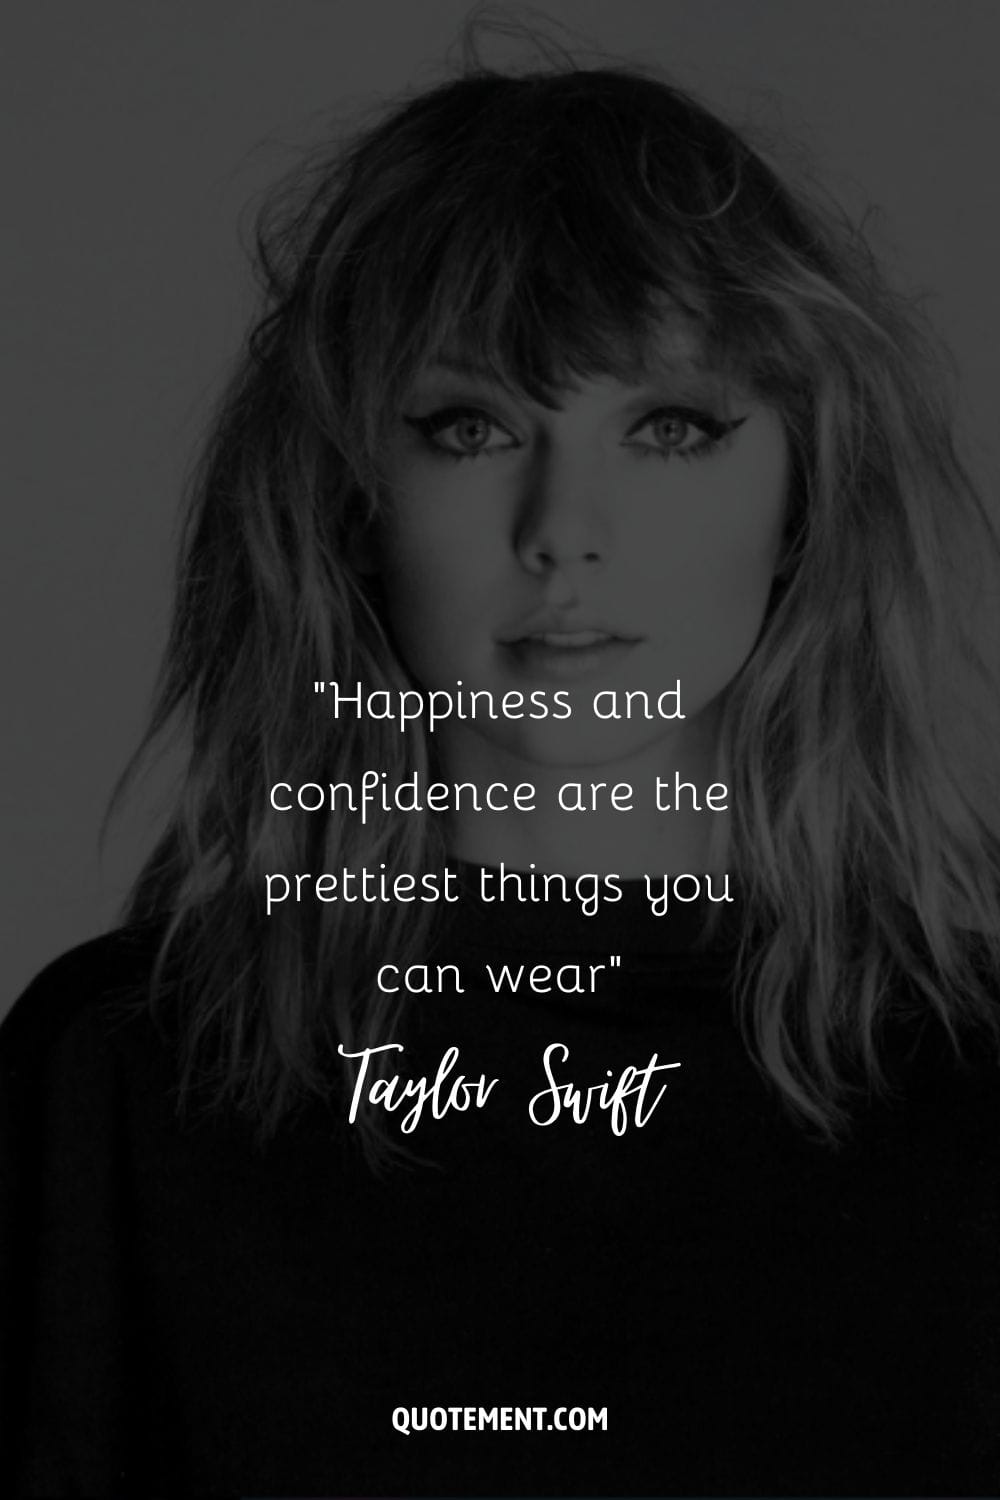 “Happiness and confidence are the prettiest things you can wear” ― Taylor Swift